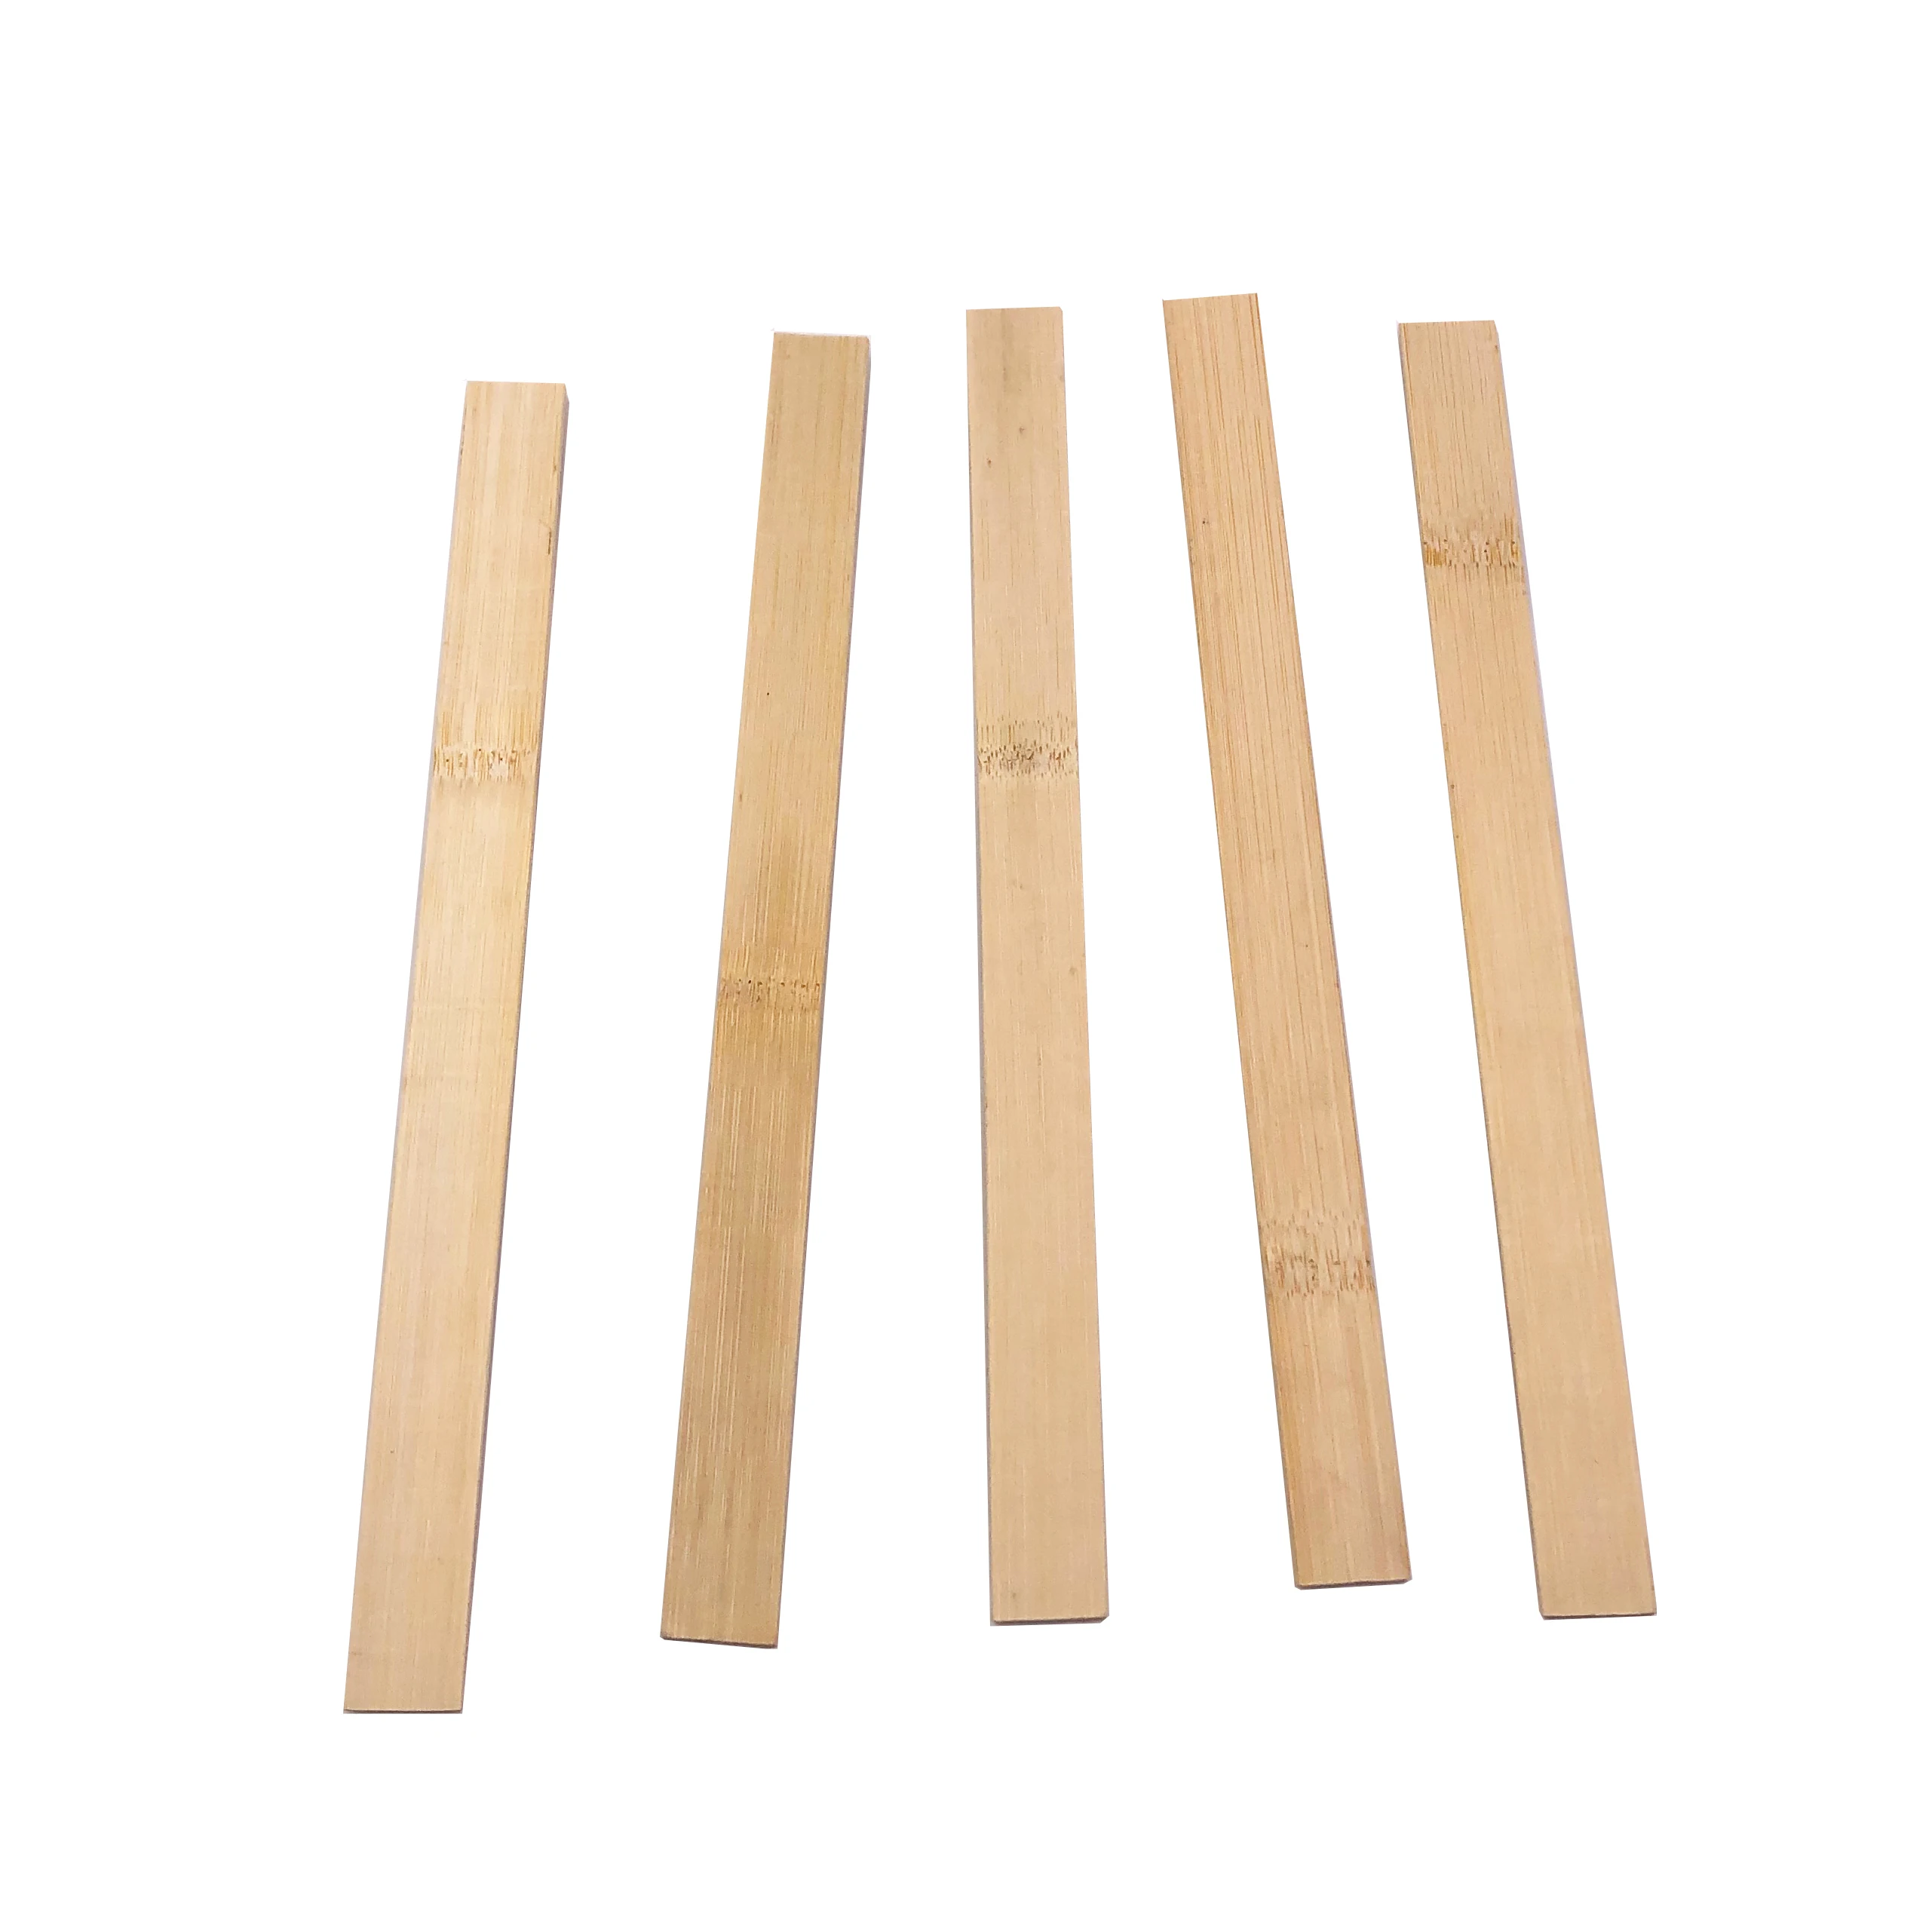 10 Inch Bamboo Paint Stir Sticks for Mixing Paint